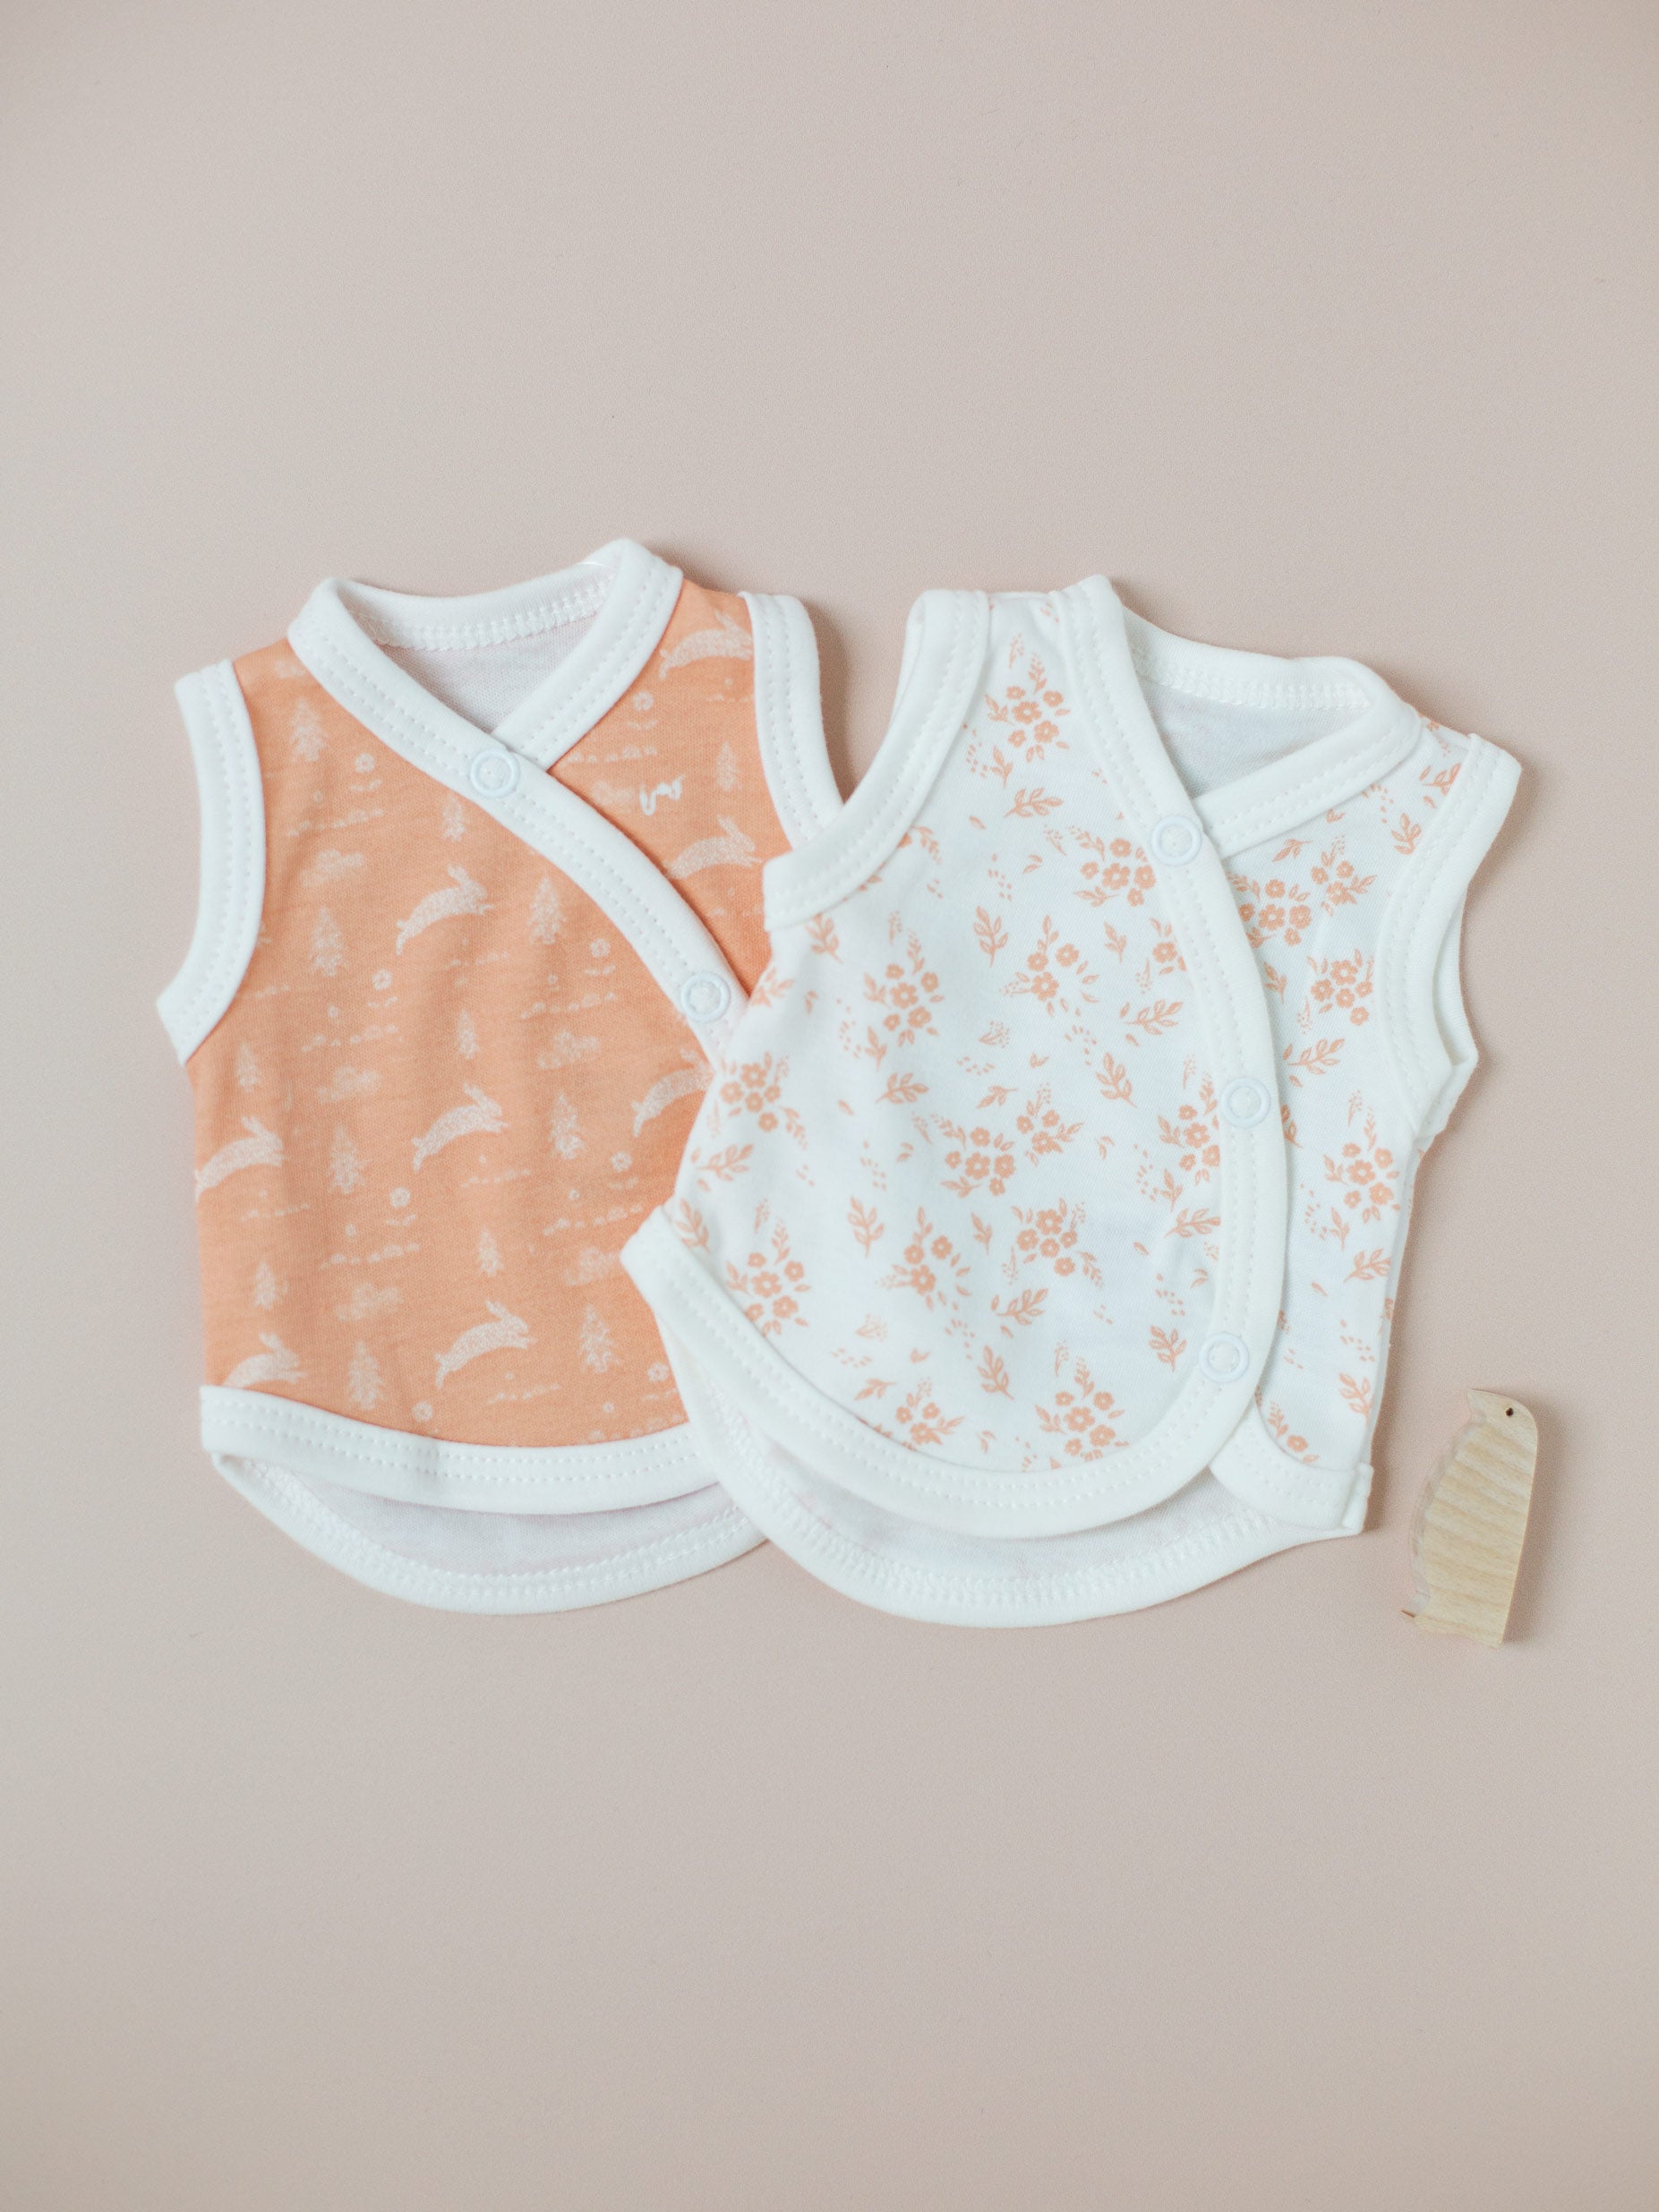 2 Pack Incubator Vest Set, Leaping Bunnies & Apricot Floral, 100% Organic Cotton Set/Multipack Tiny & Small 